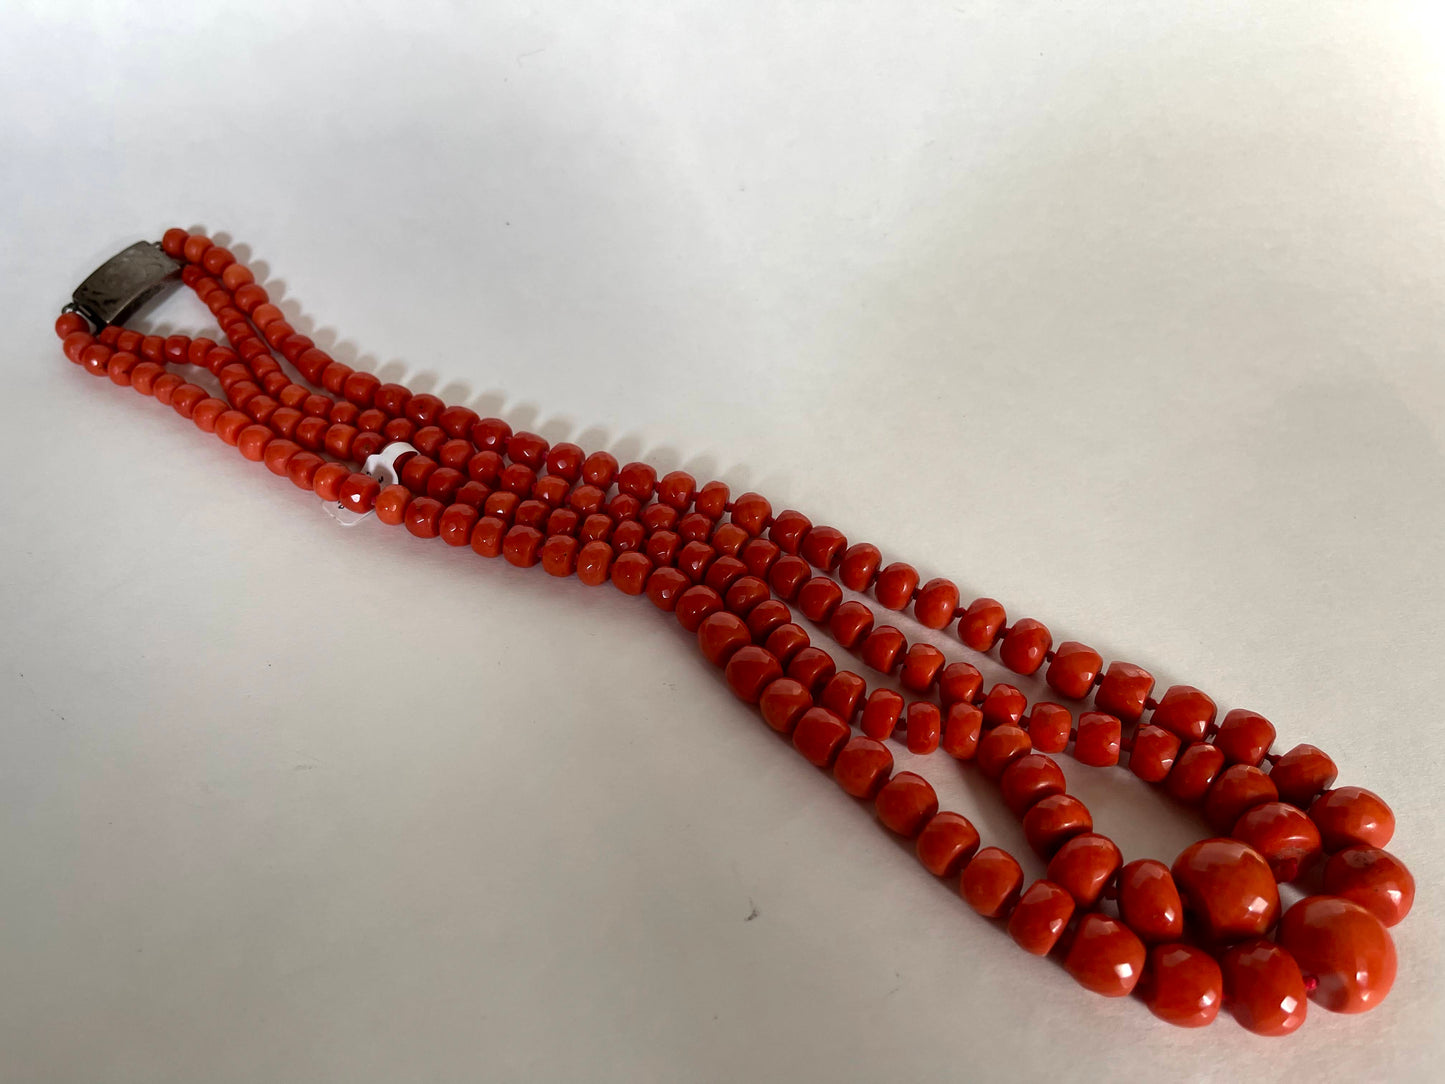 Antique double stranded faceted coral bead necklace